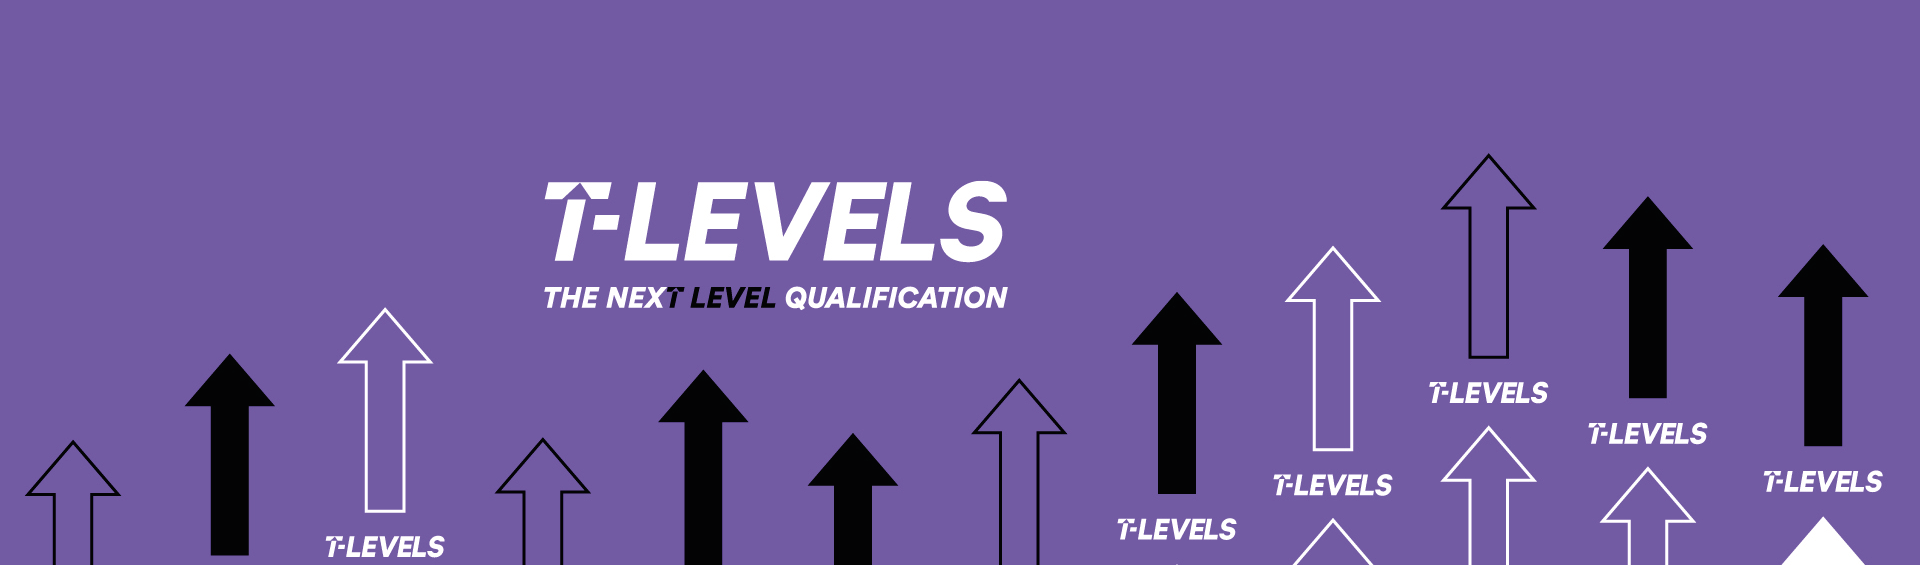 Wirral Met is introducing T Level qualifications in 2021. Red T Level branding by The Department of Education